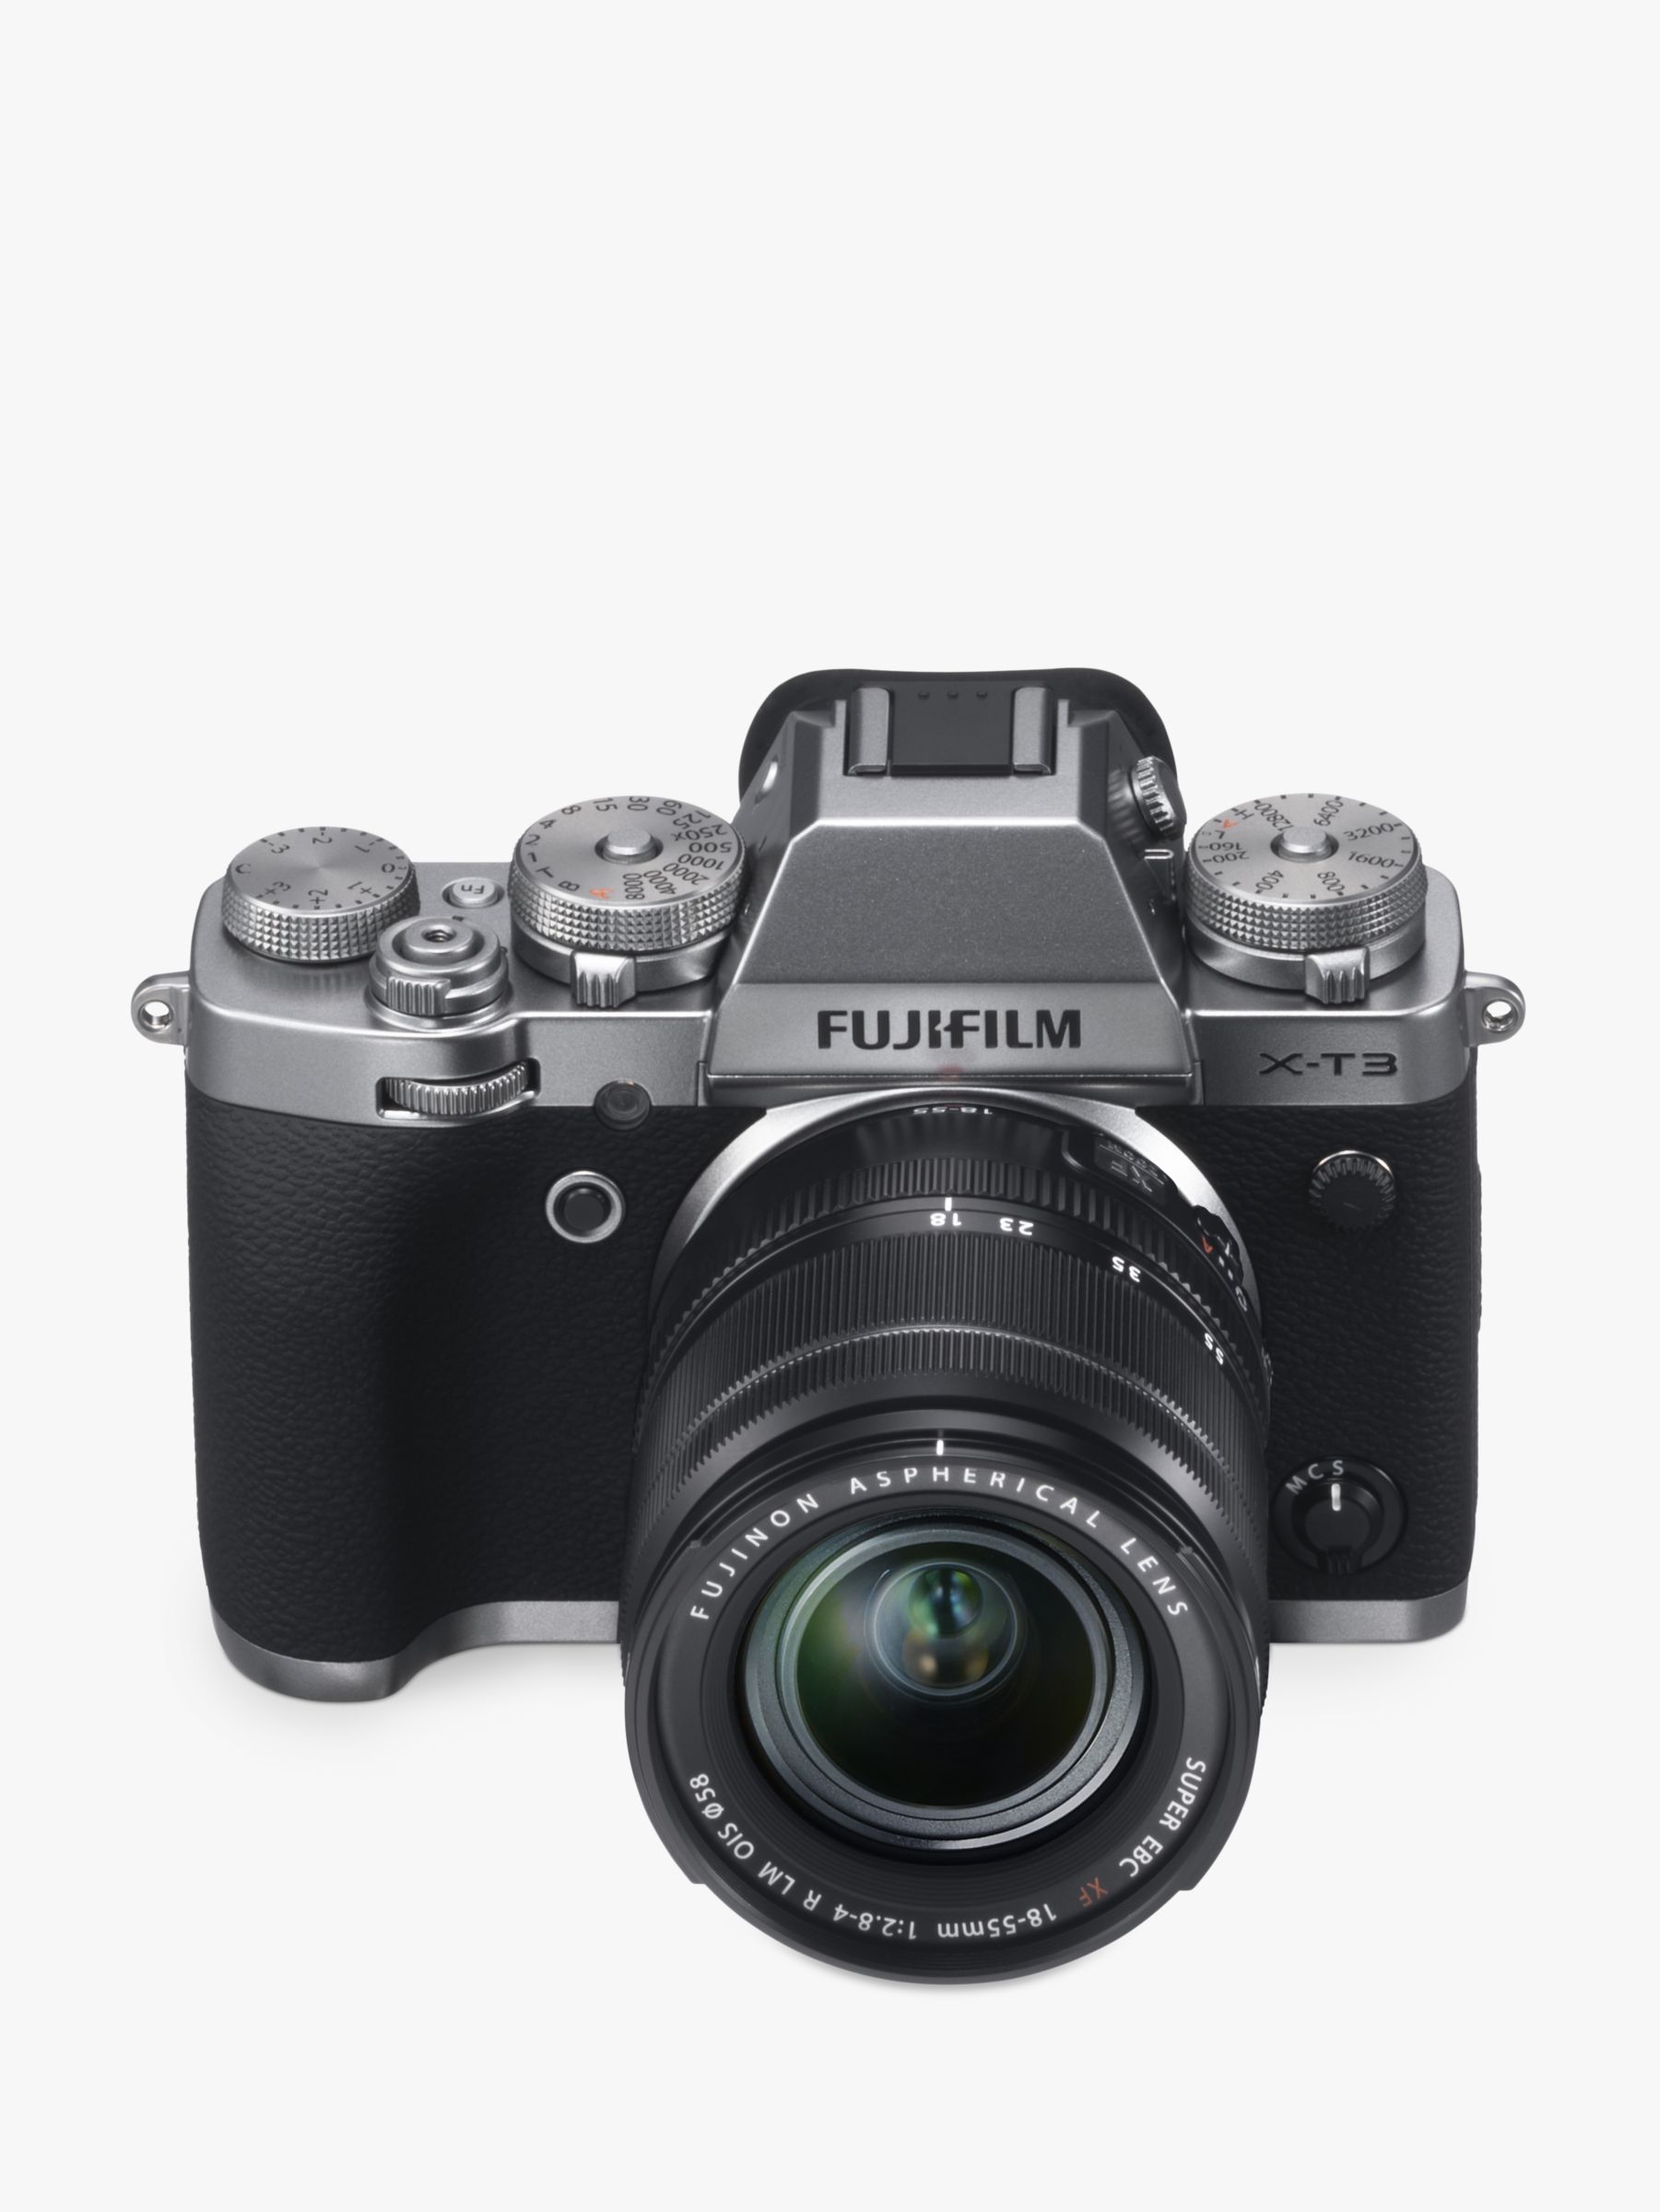 Image of Fujifilm XT3 Compact System Camera with XF 1855mm IS Lens 4K Ultra HD 261MP WiFi OLED EVF 3 LCD Touch Screen